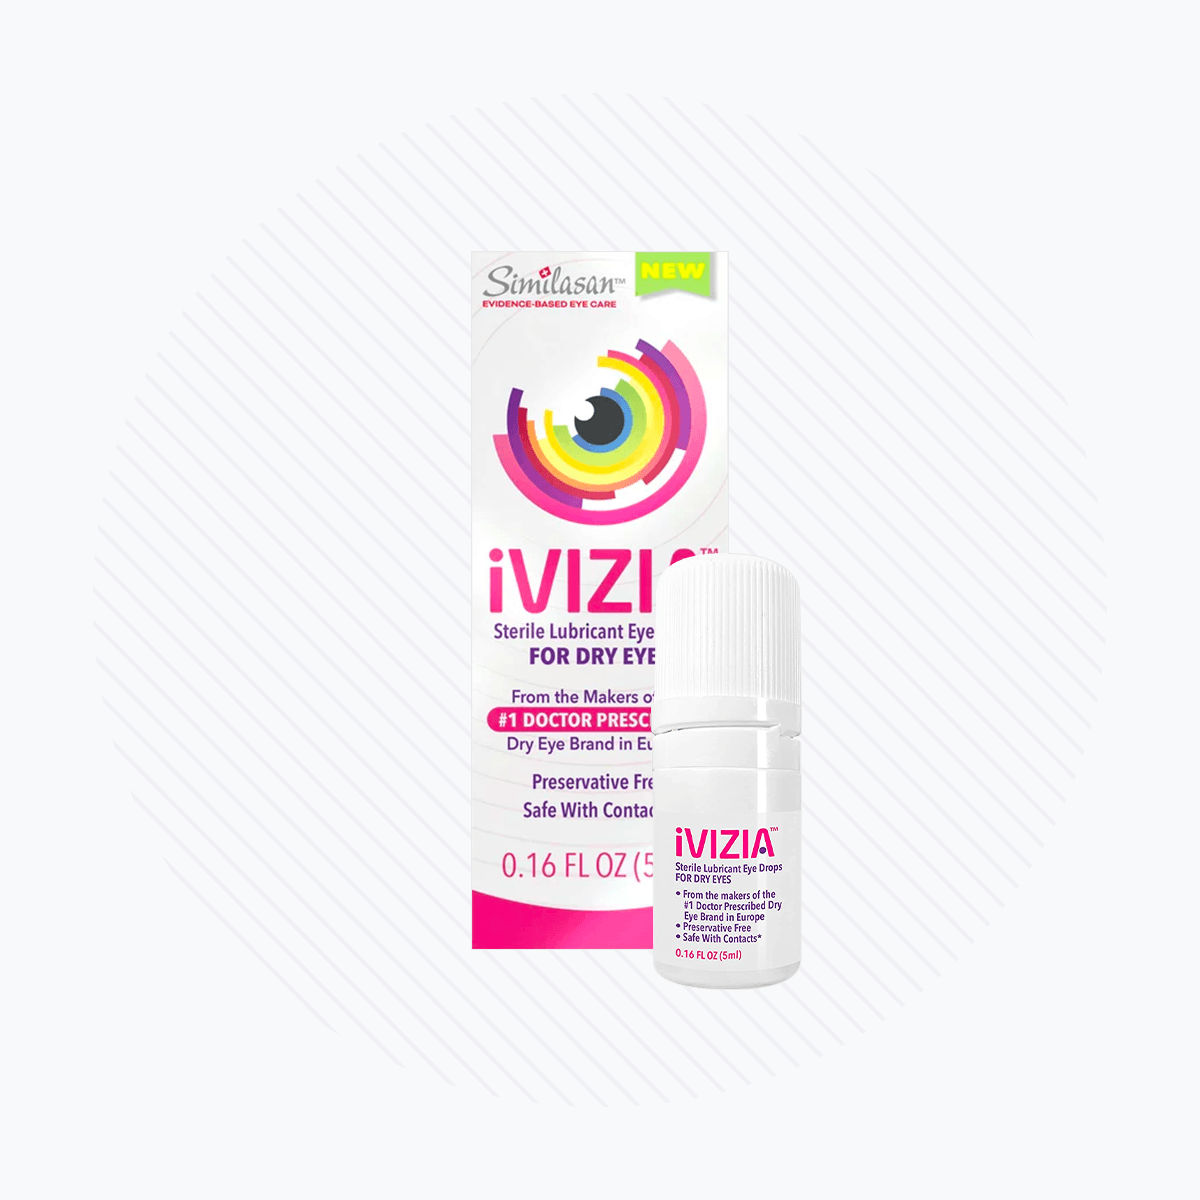 iVIZIA Sterile Lubricant Eye Drops for Dry Eyes, Preservative-Free, Dry Eye Relief, Contact Lens Friendly, 0.17 fl oz (5ml bottle) - DryEye Rescue Store